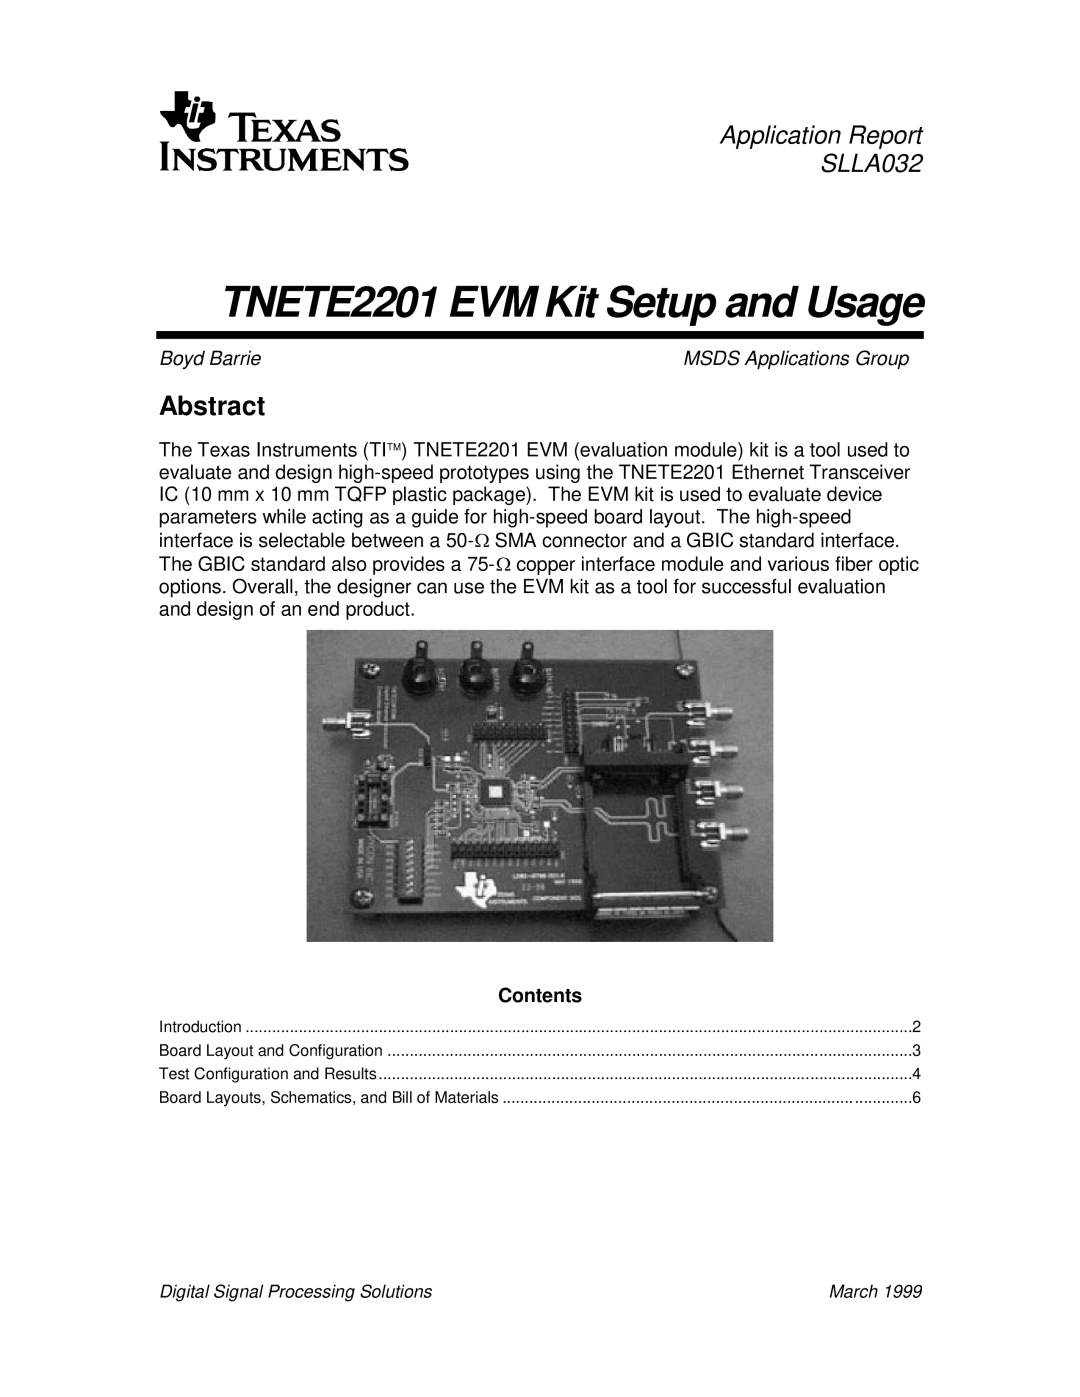 Texas Instruments manual Abstract, TNETE2201 EVM Kit Setup and Usage, Application Report SLLA032, Boyd Barrie, Contents 